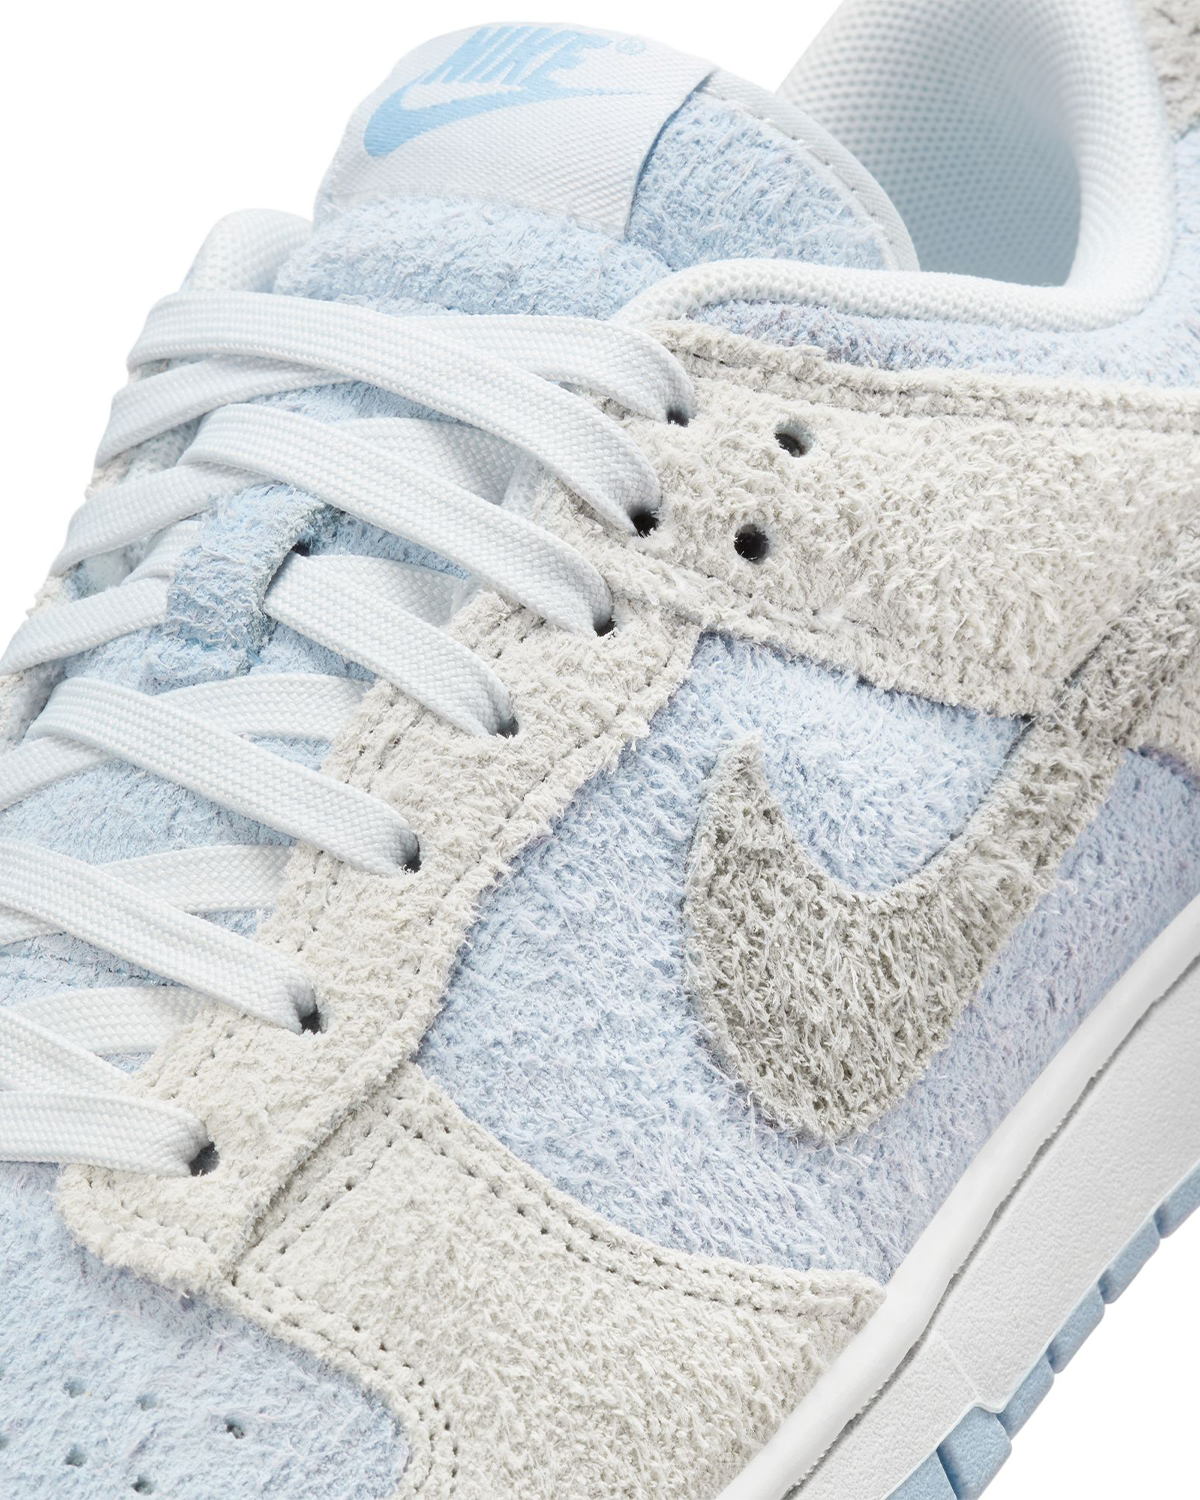 Dunk Low Light Armory Blue and Photon Dust (Womens)